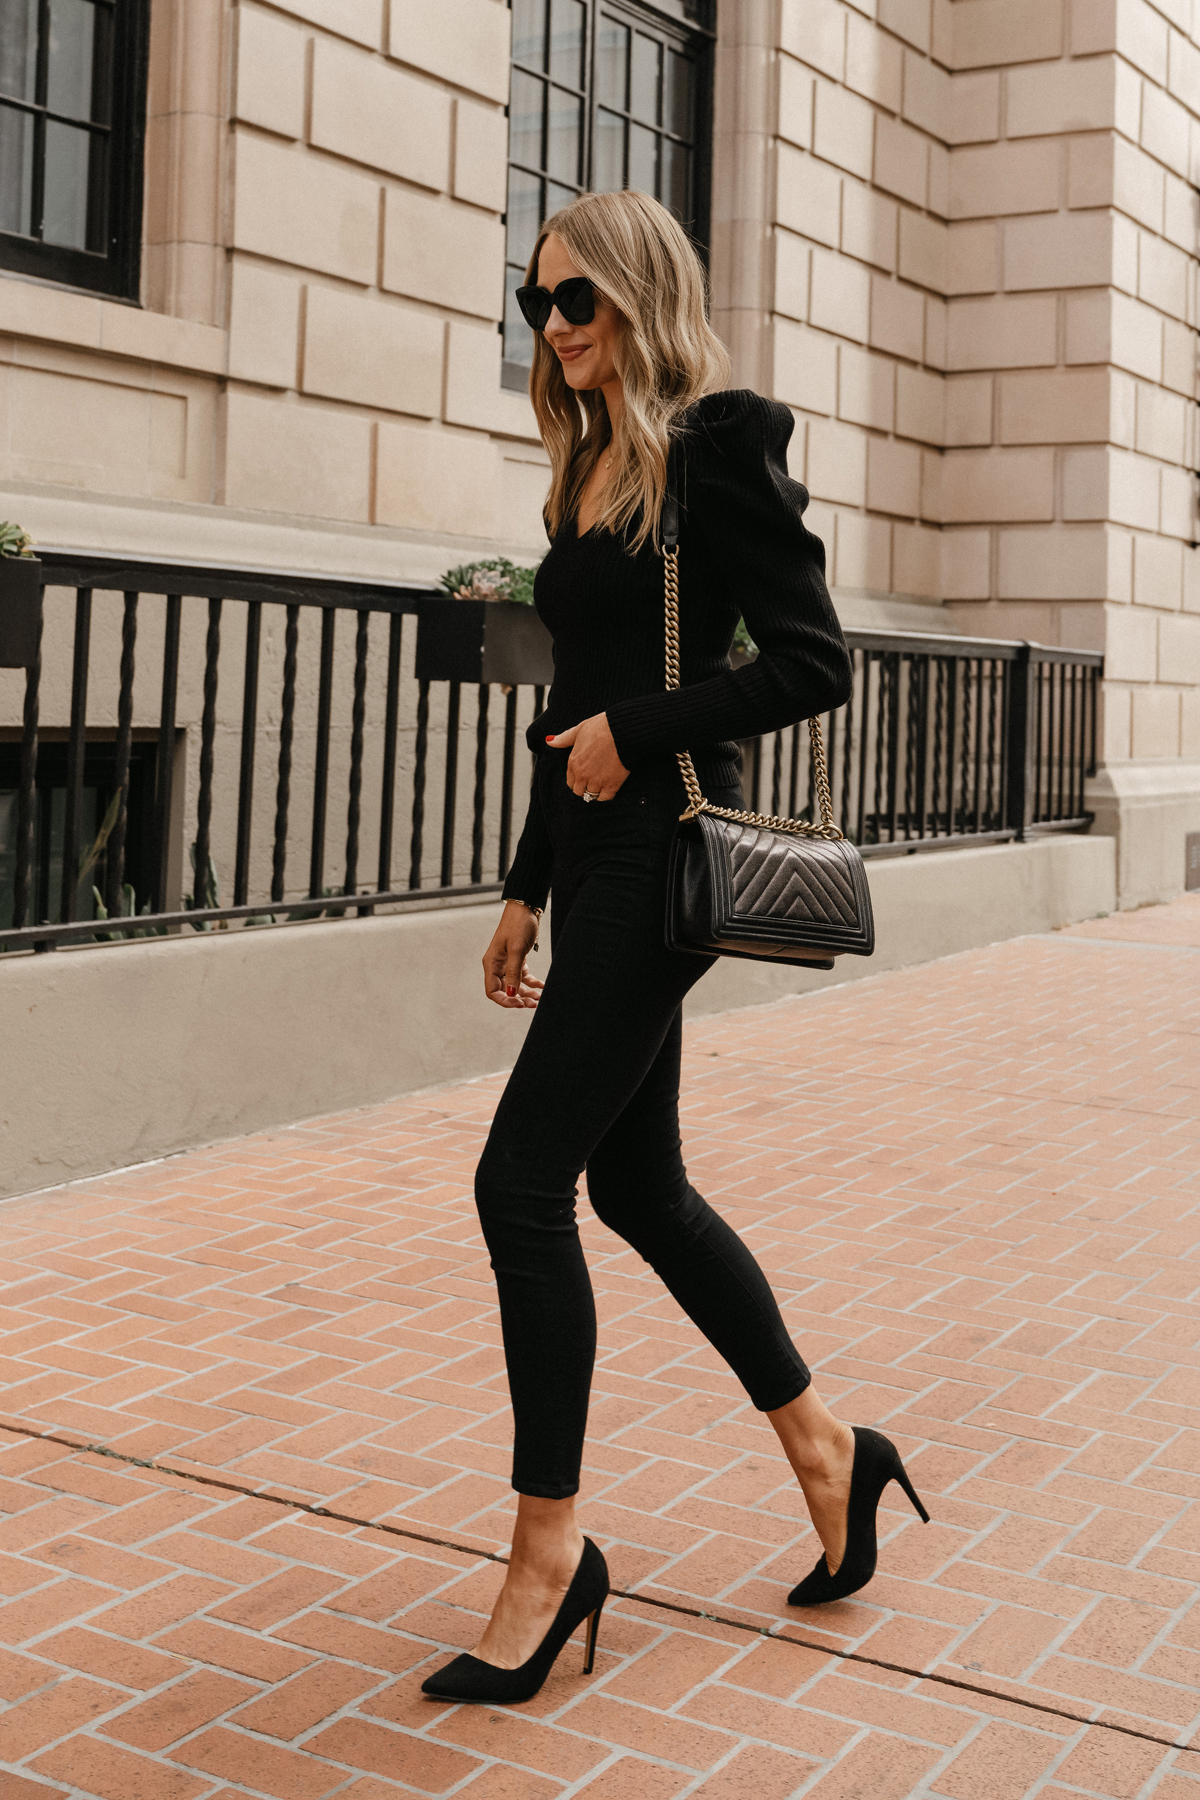 Fashion Jackson Wearing Black Puff Sleeve Sweater Black Skinny Jeans Black Pumps all black party outfits for women 2